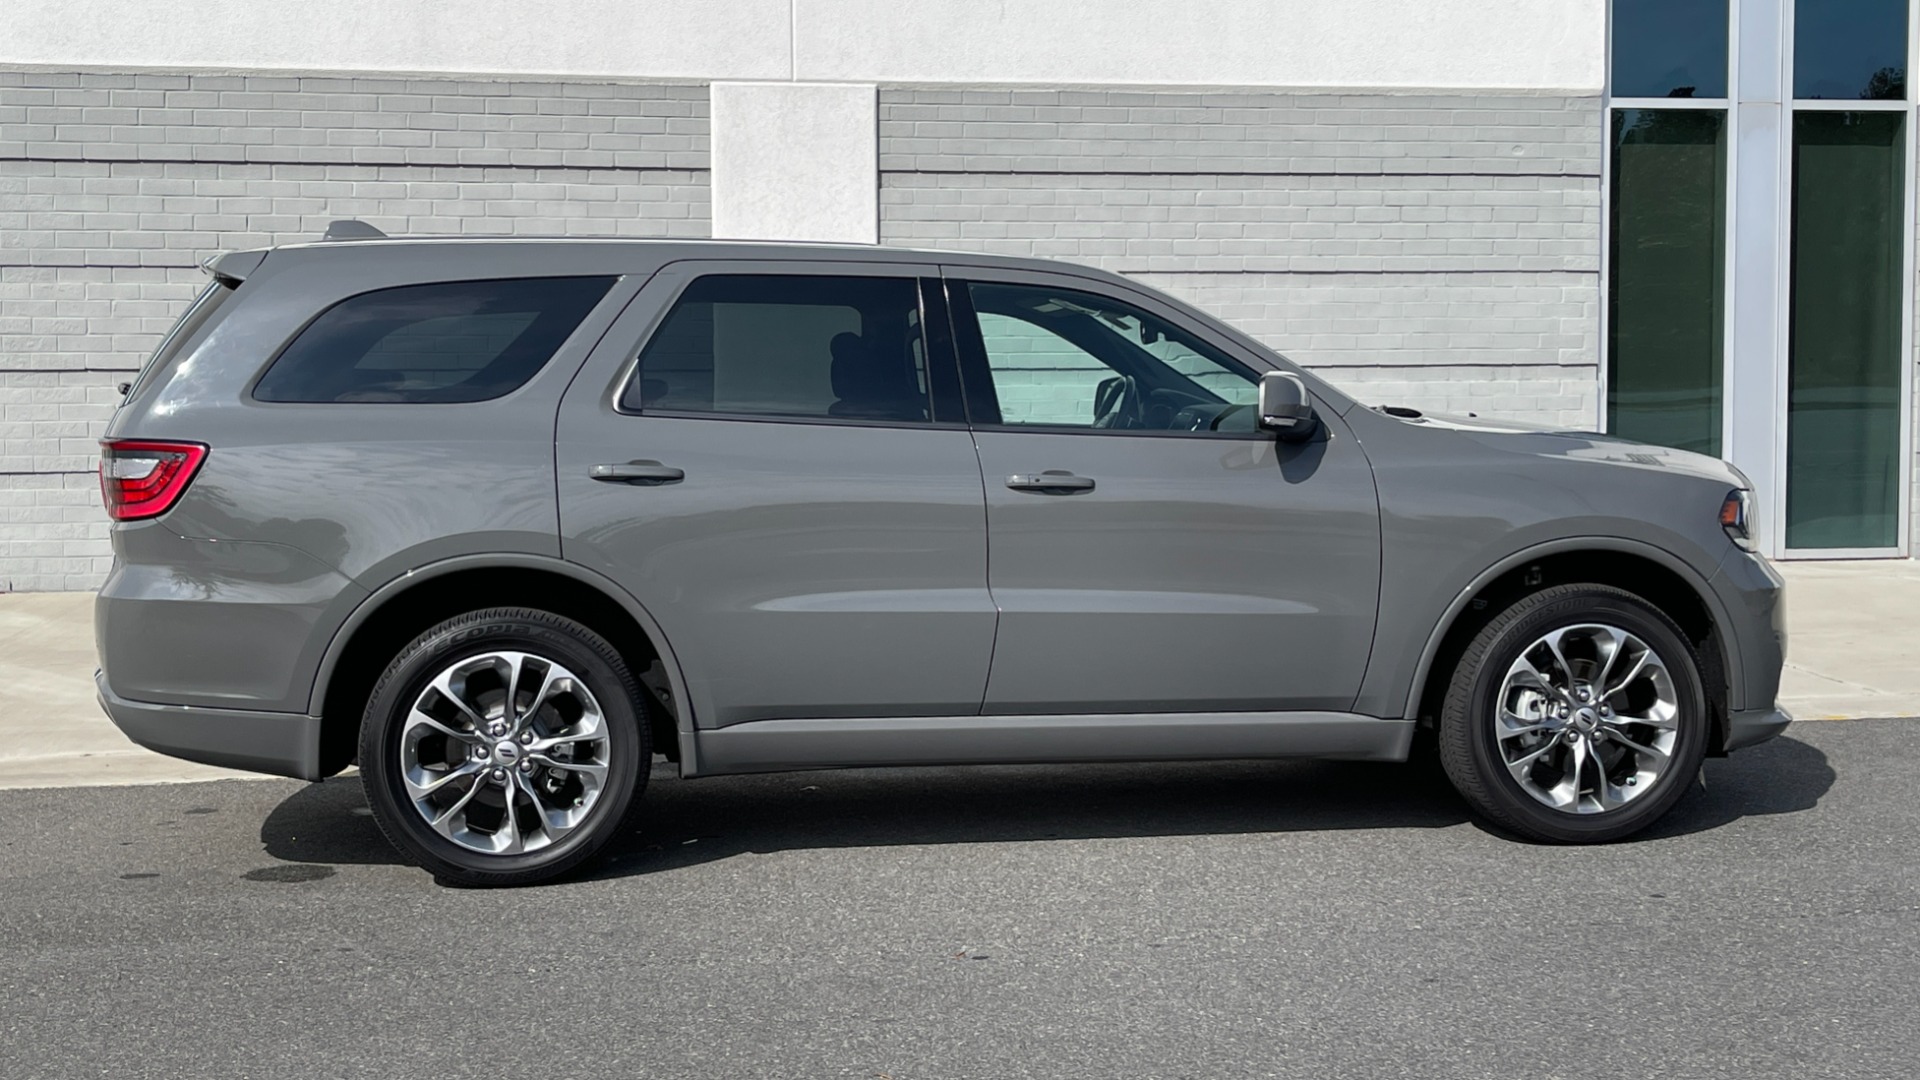 Used 2020 Dodge DURANGO GT PLUS AWD 3.6L / 8-SPD AUTO / ALPINE / 3-ROW / REARVIEW for sale $40,695 at Formula Imports in Charlotte NC 28227 6